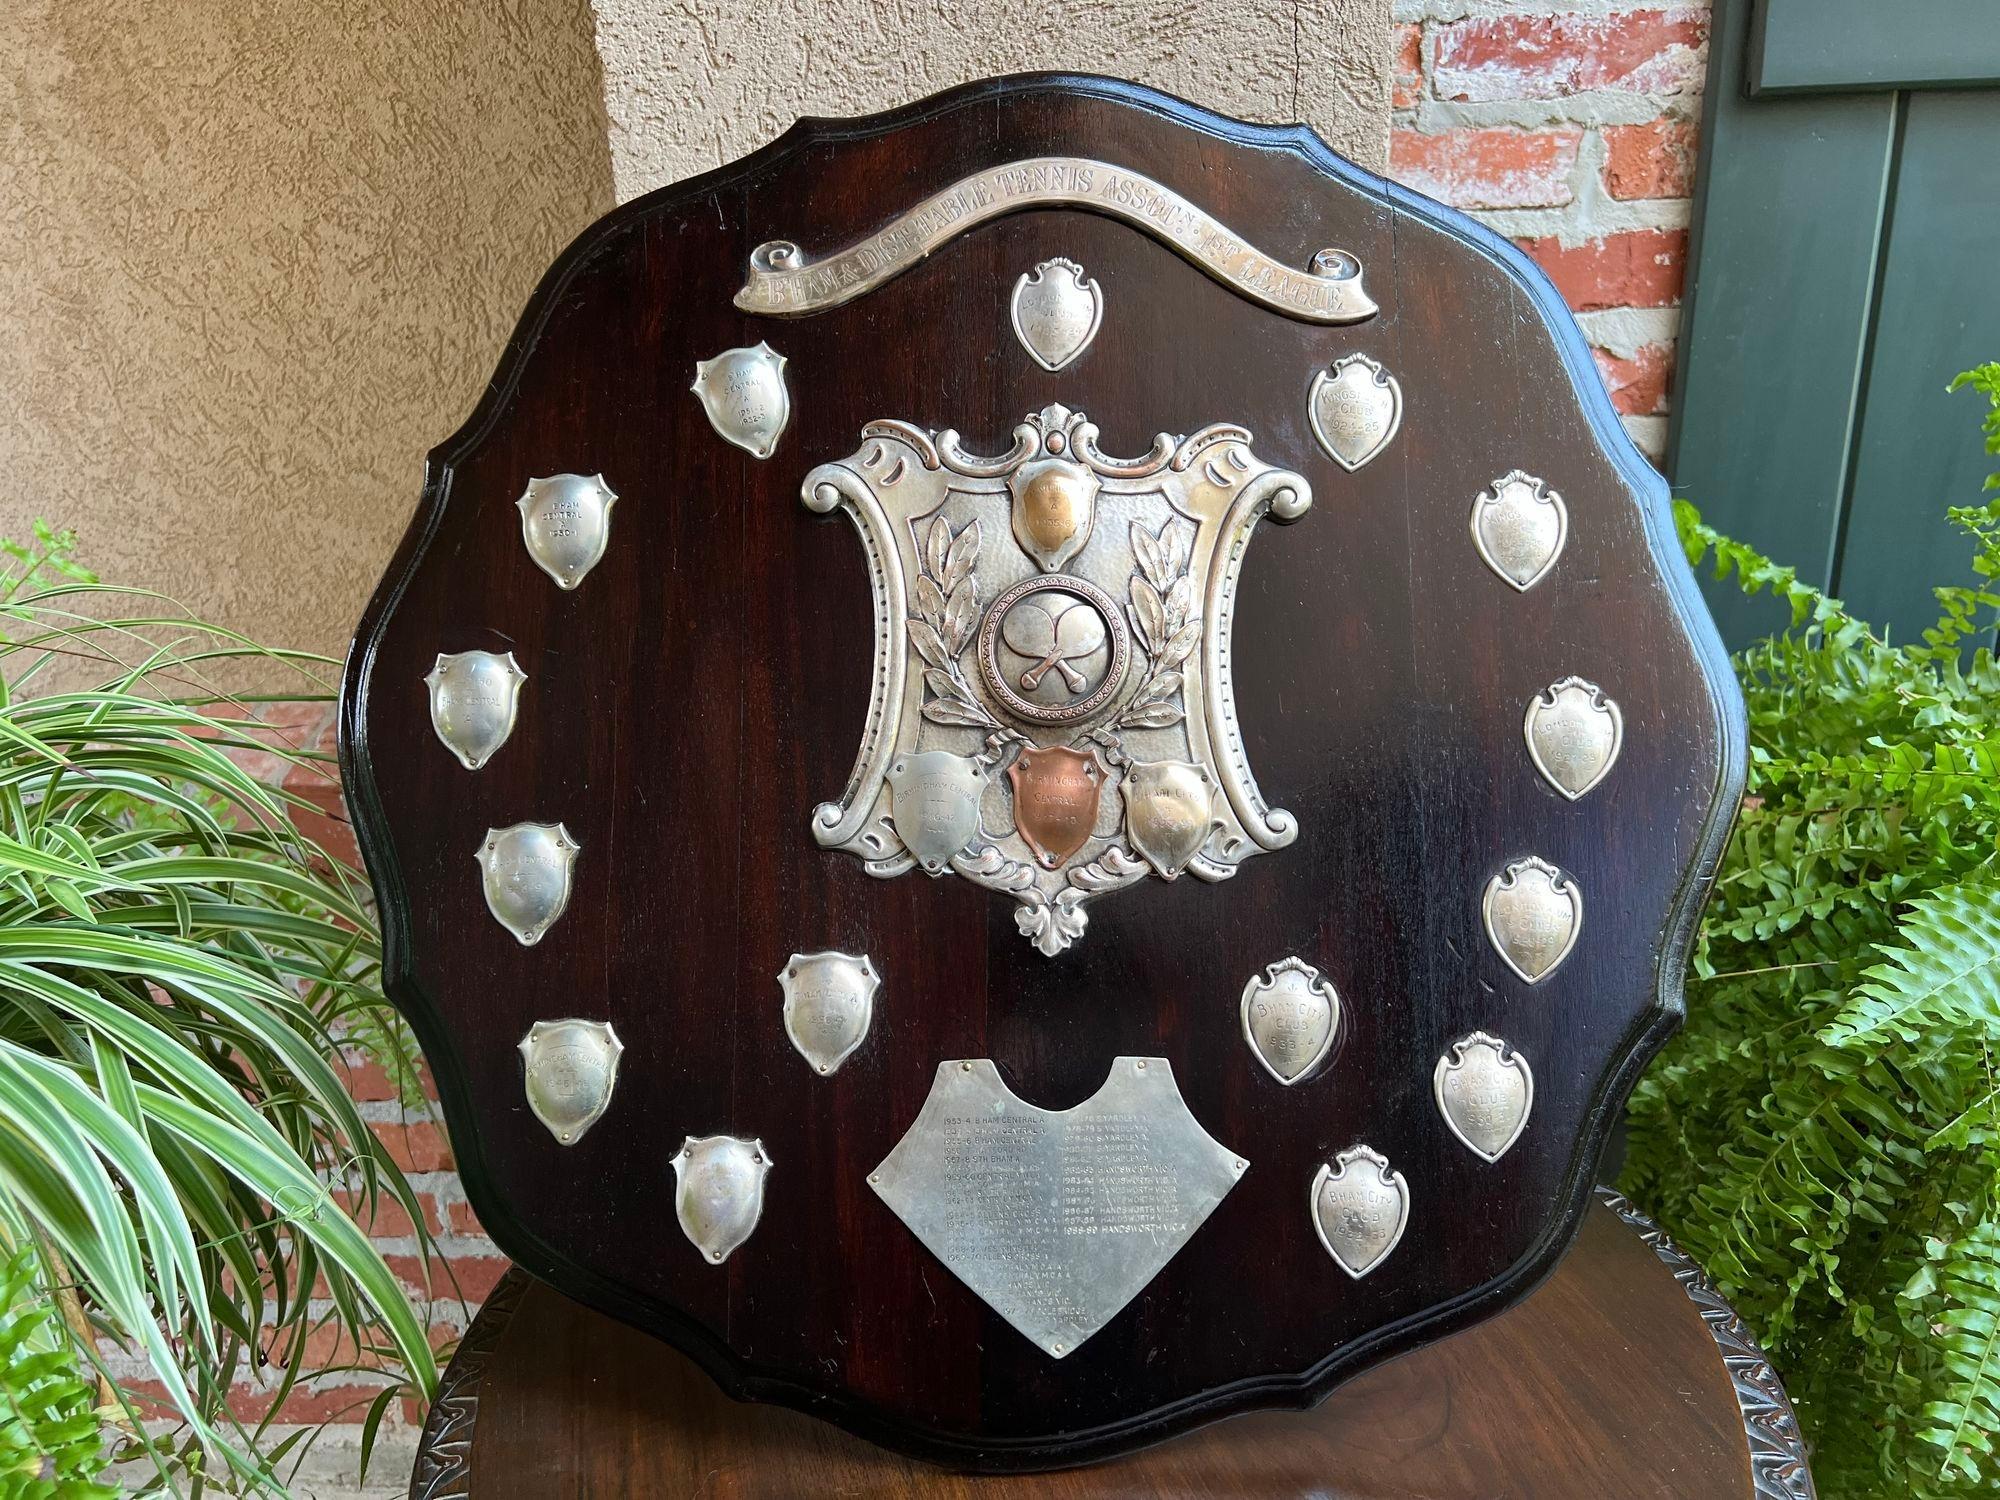 Antique English Table Tennis Trophy Award Plaque c1939 Silver plate Shield.

Direct from England, just arrived in our most recent container, we have several of these one-of-a-kind English trophies that are brimming with provenance, and oh “the